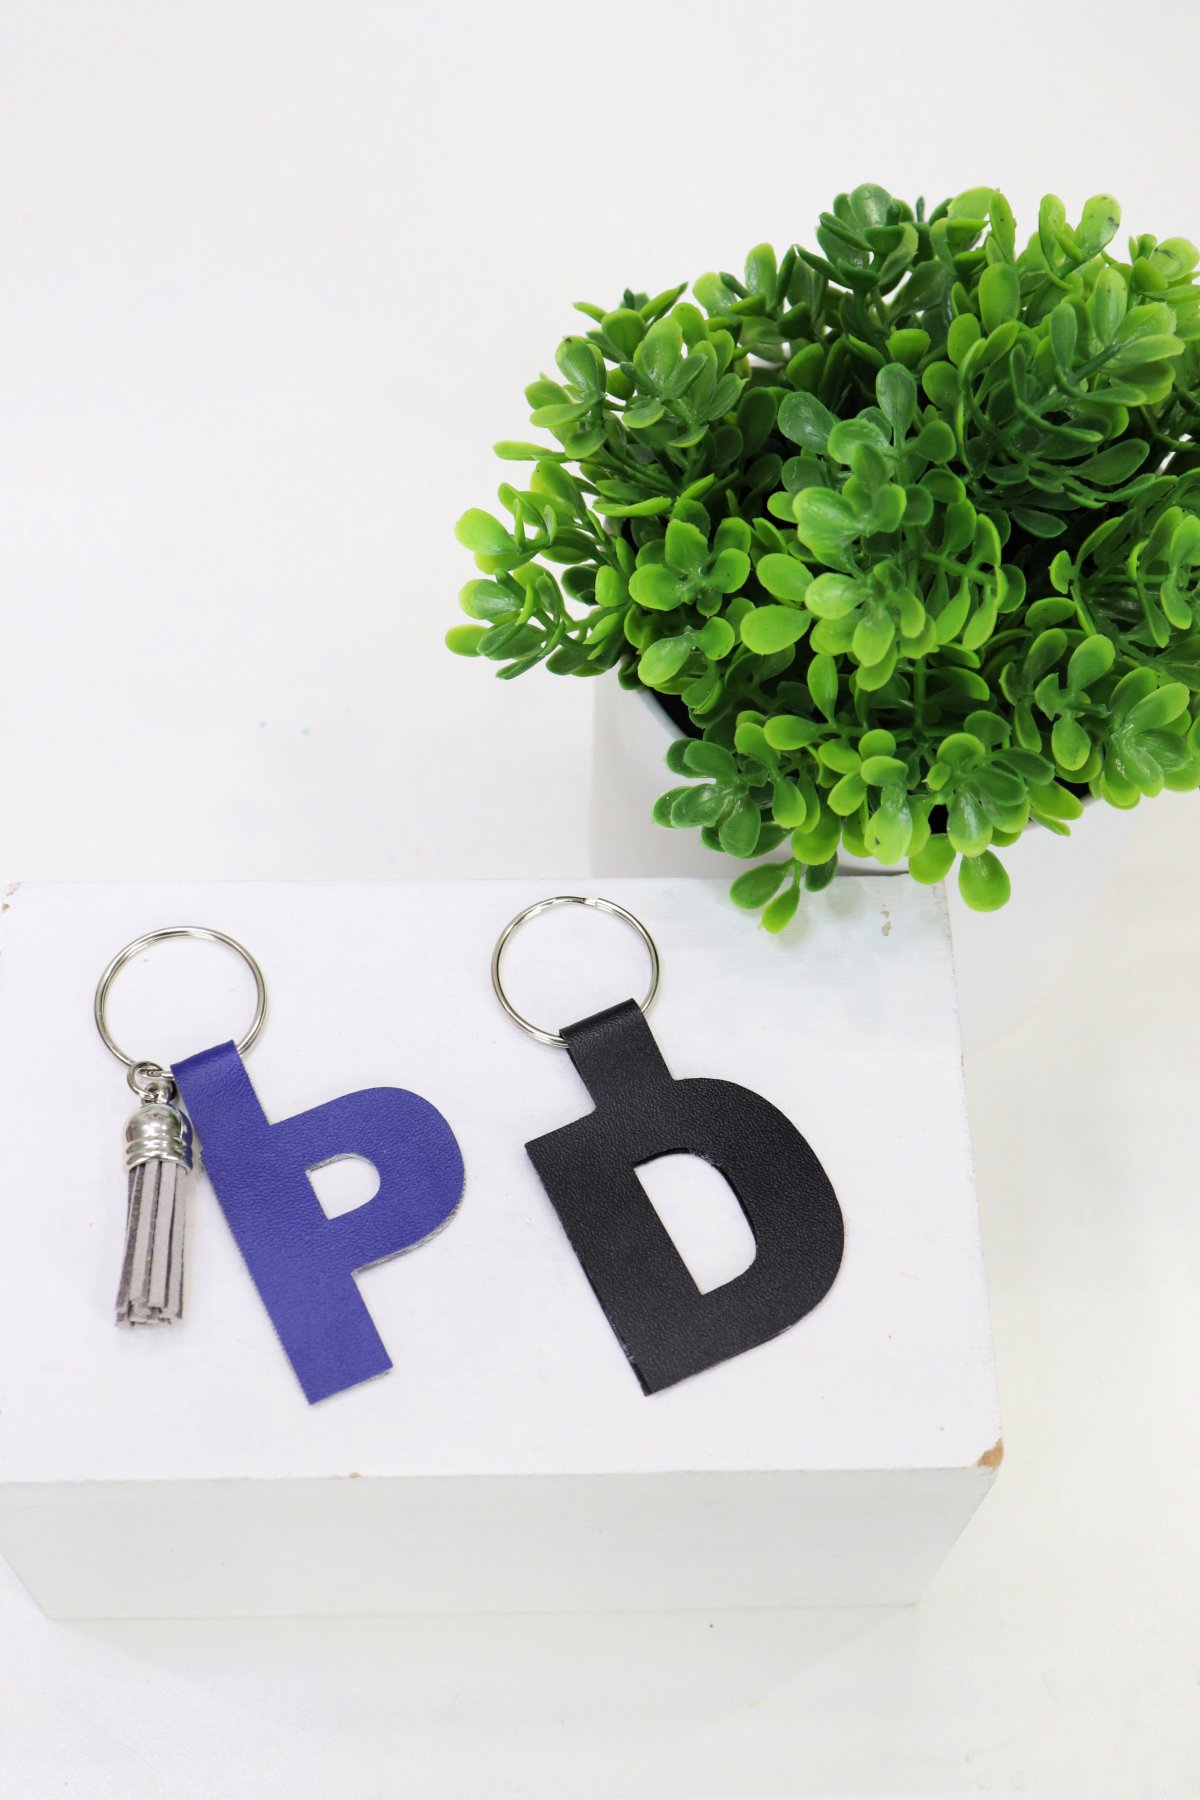 Image contains two monogram keychains; a blue “P” and a black “D” on a white box with a faux plant to the side.